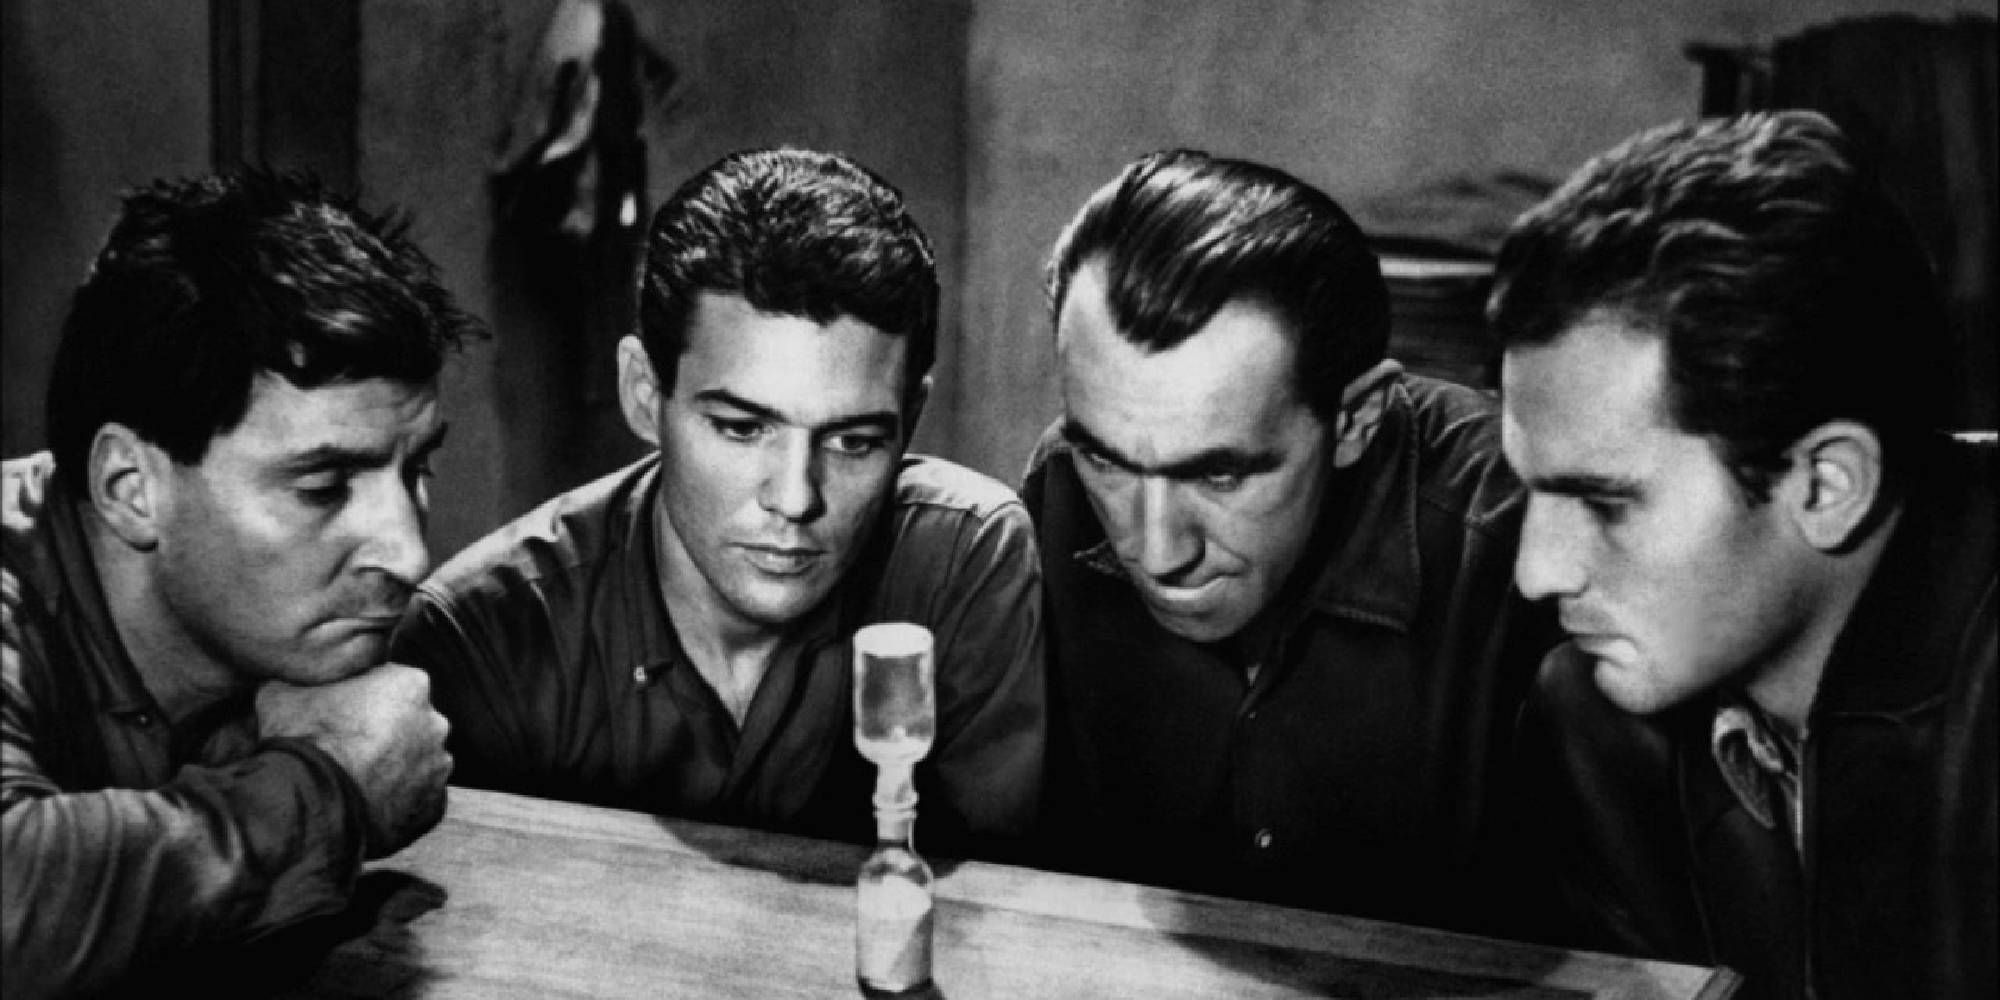 Three men in Le Trou looking at an hourglass.